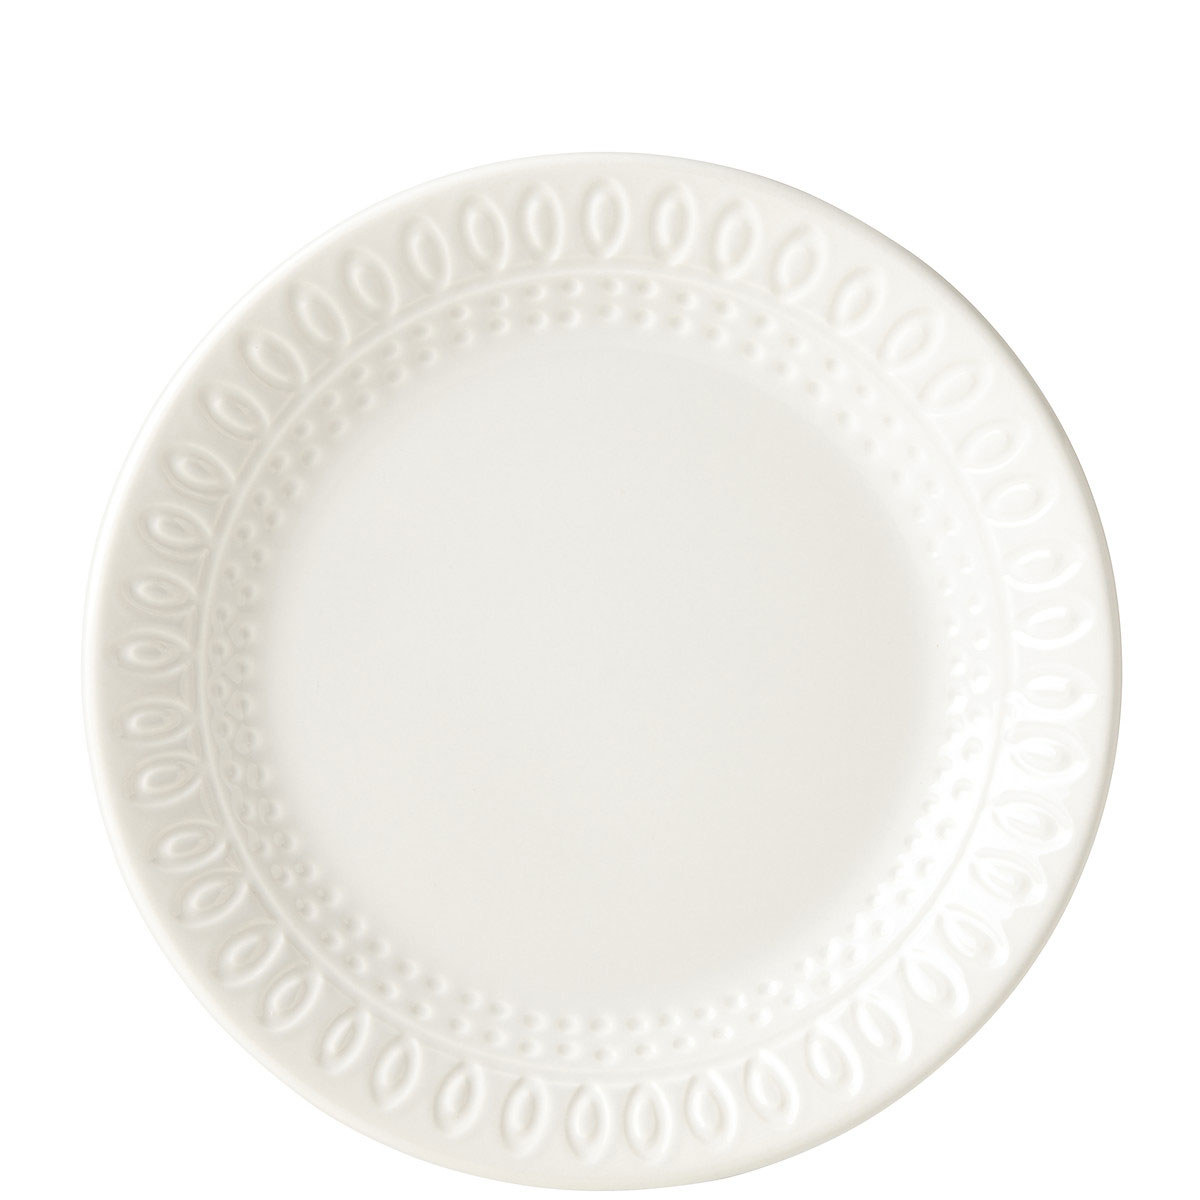 Kate Spade China by Lenox, Willow Dr Cream Accent Plate, Single